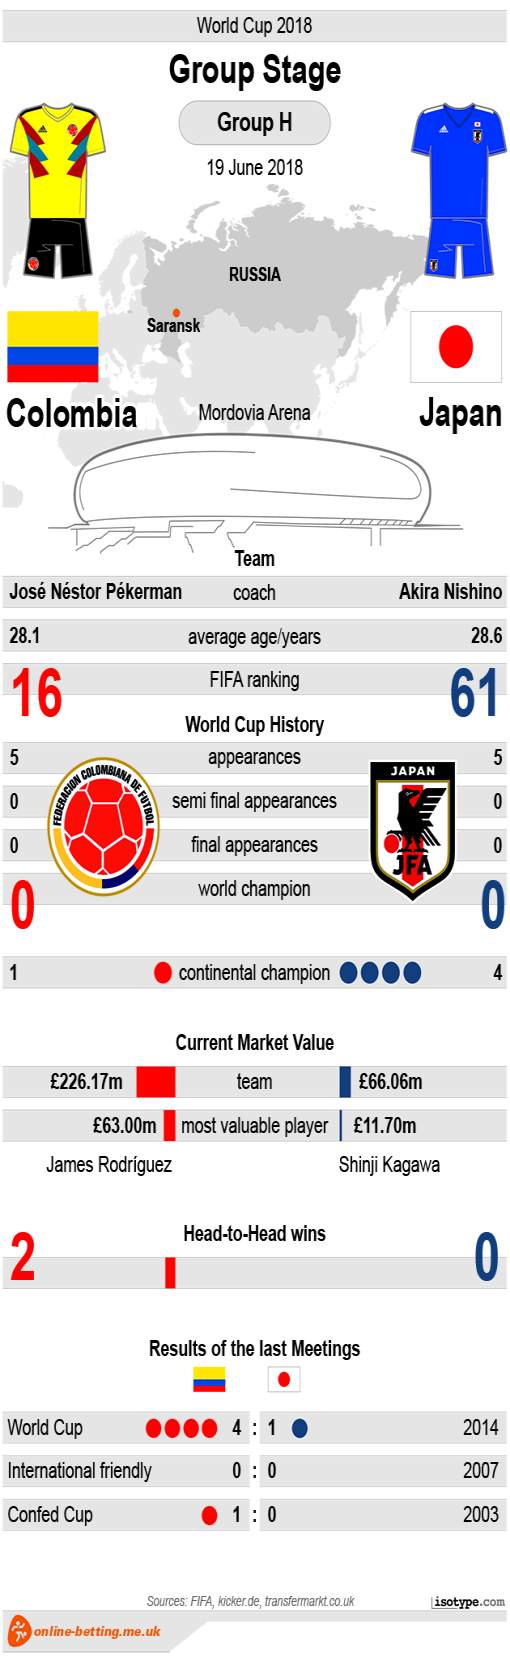 Colombia v Japan World Cup 2018 - Infographic